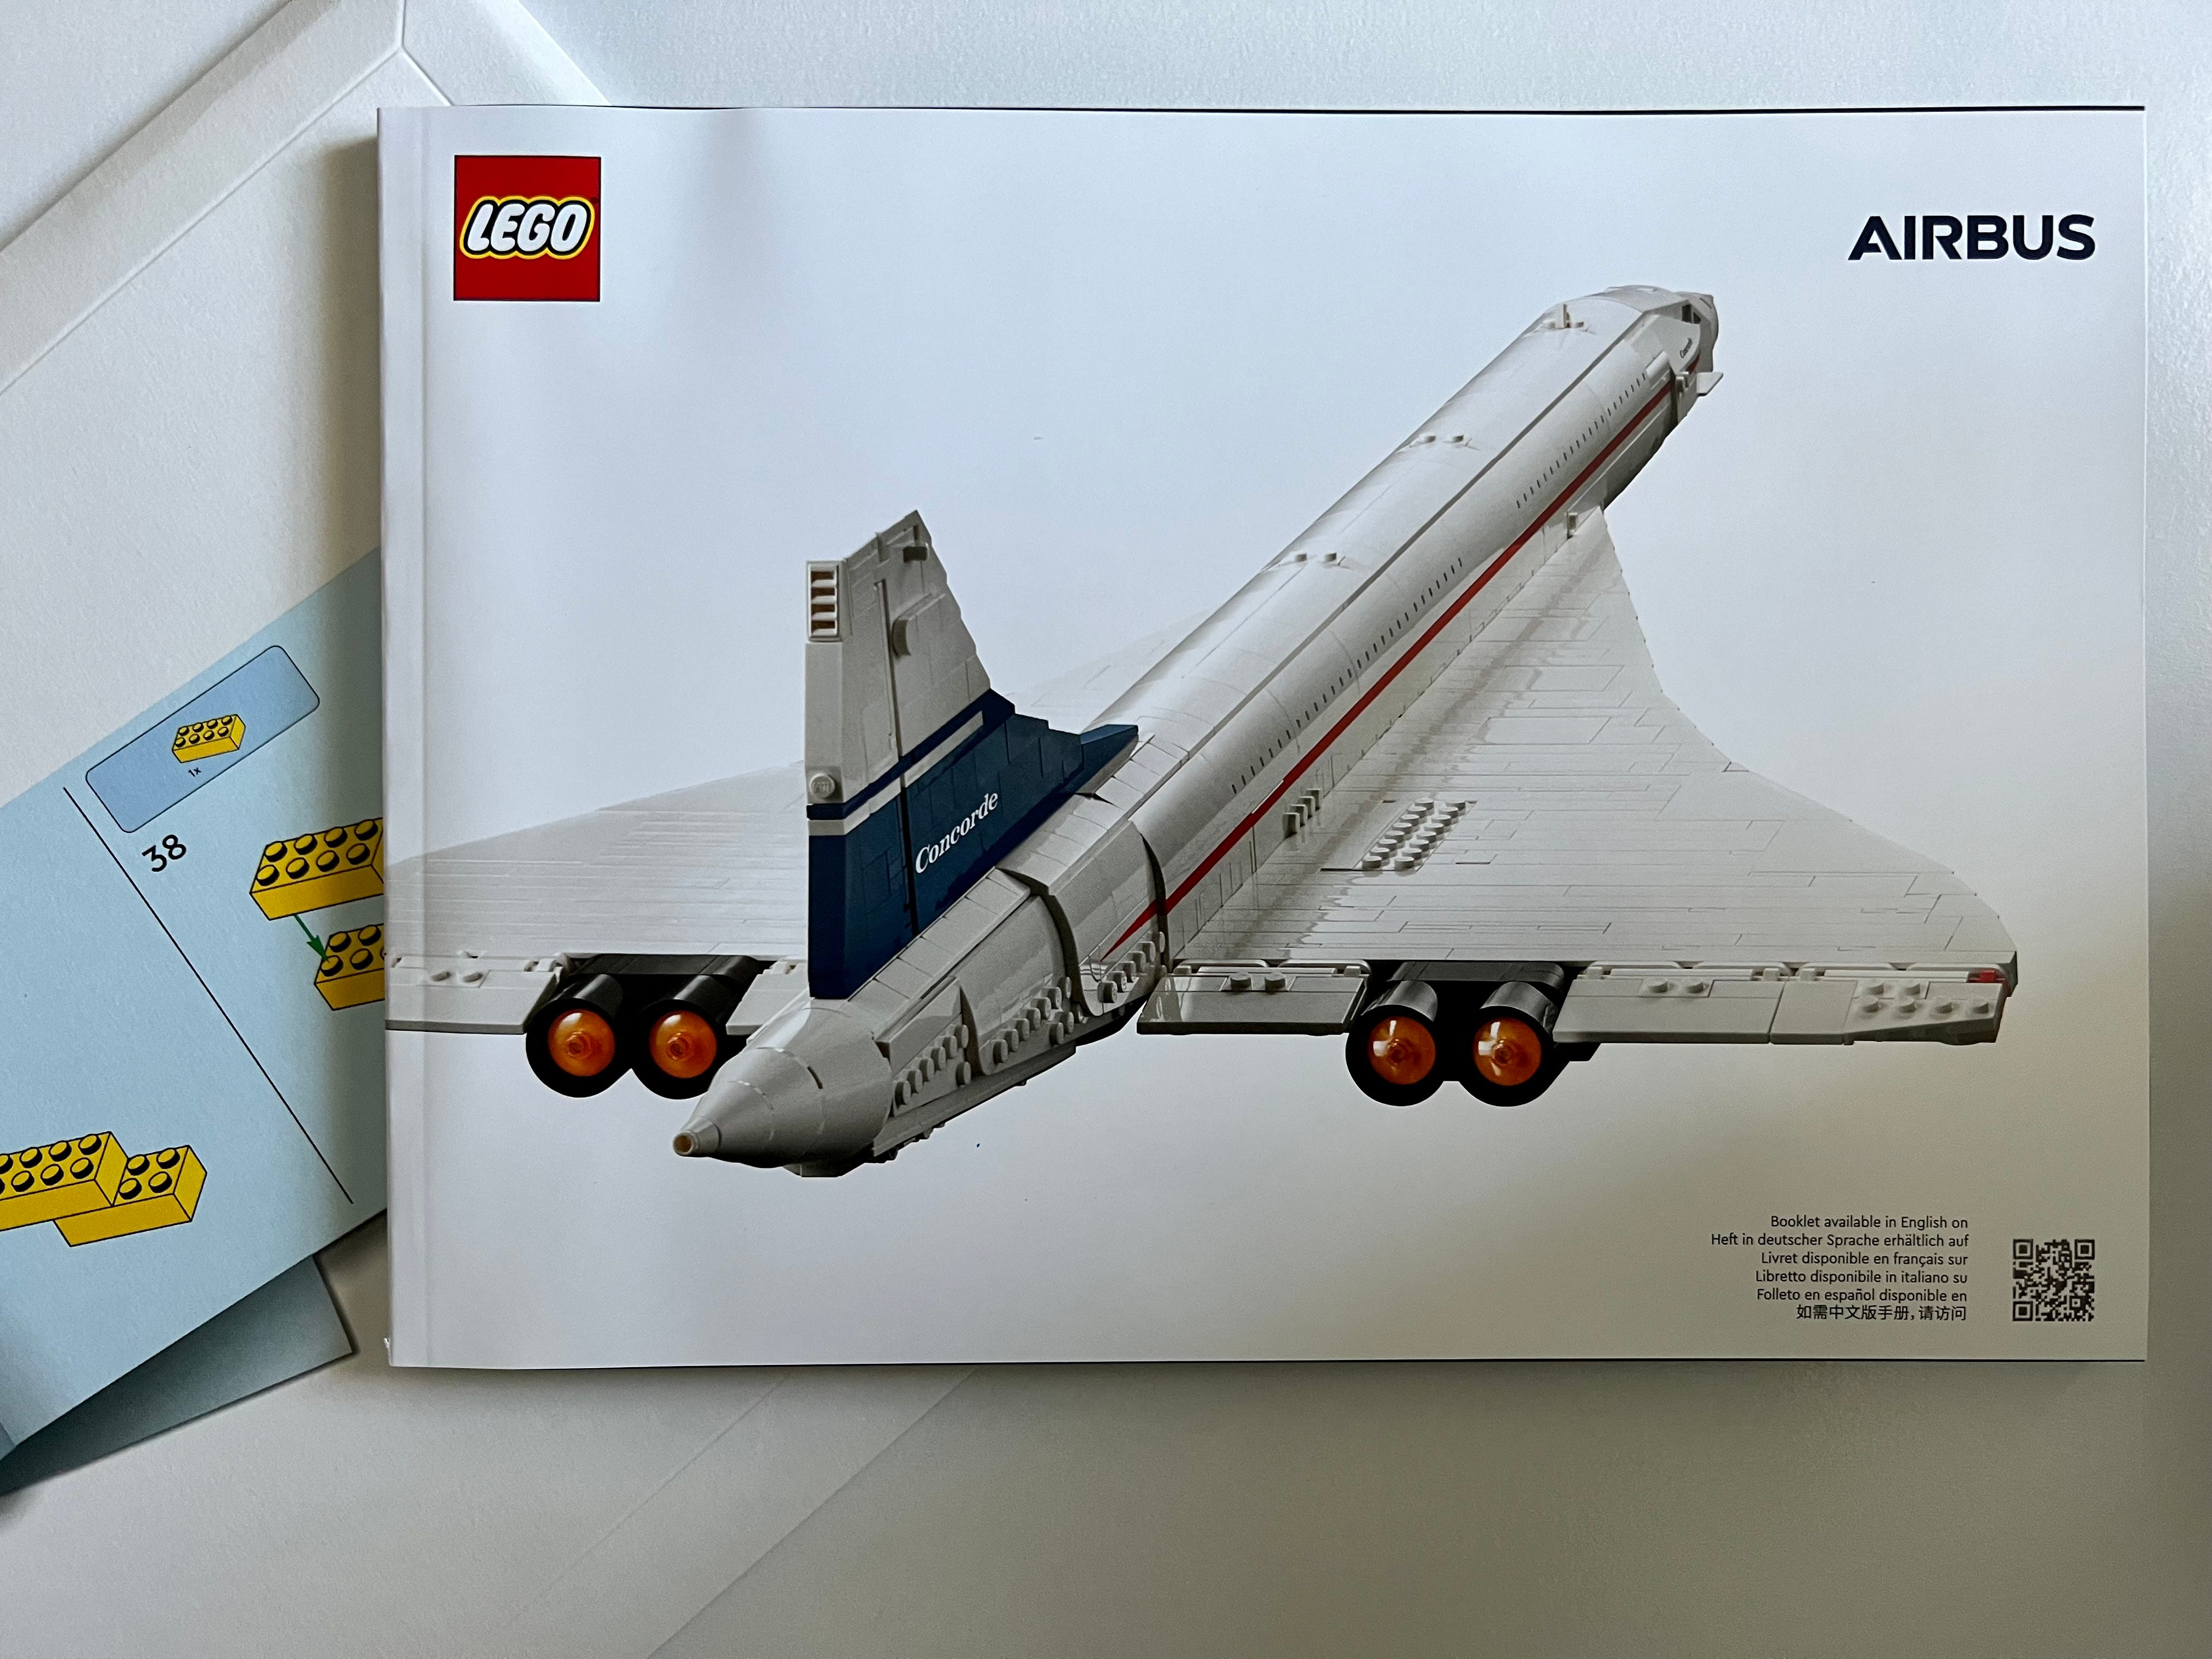 LEGO Pays Tribute To The Concorde And Goes Supersonic, by Attila Vágó, Bricks n' Brackets